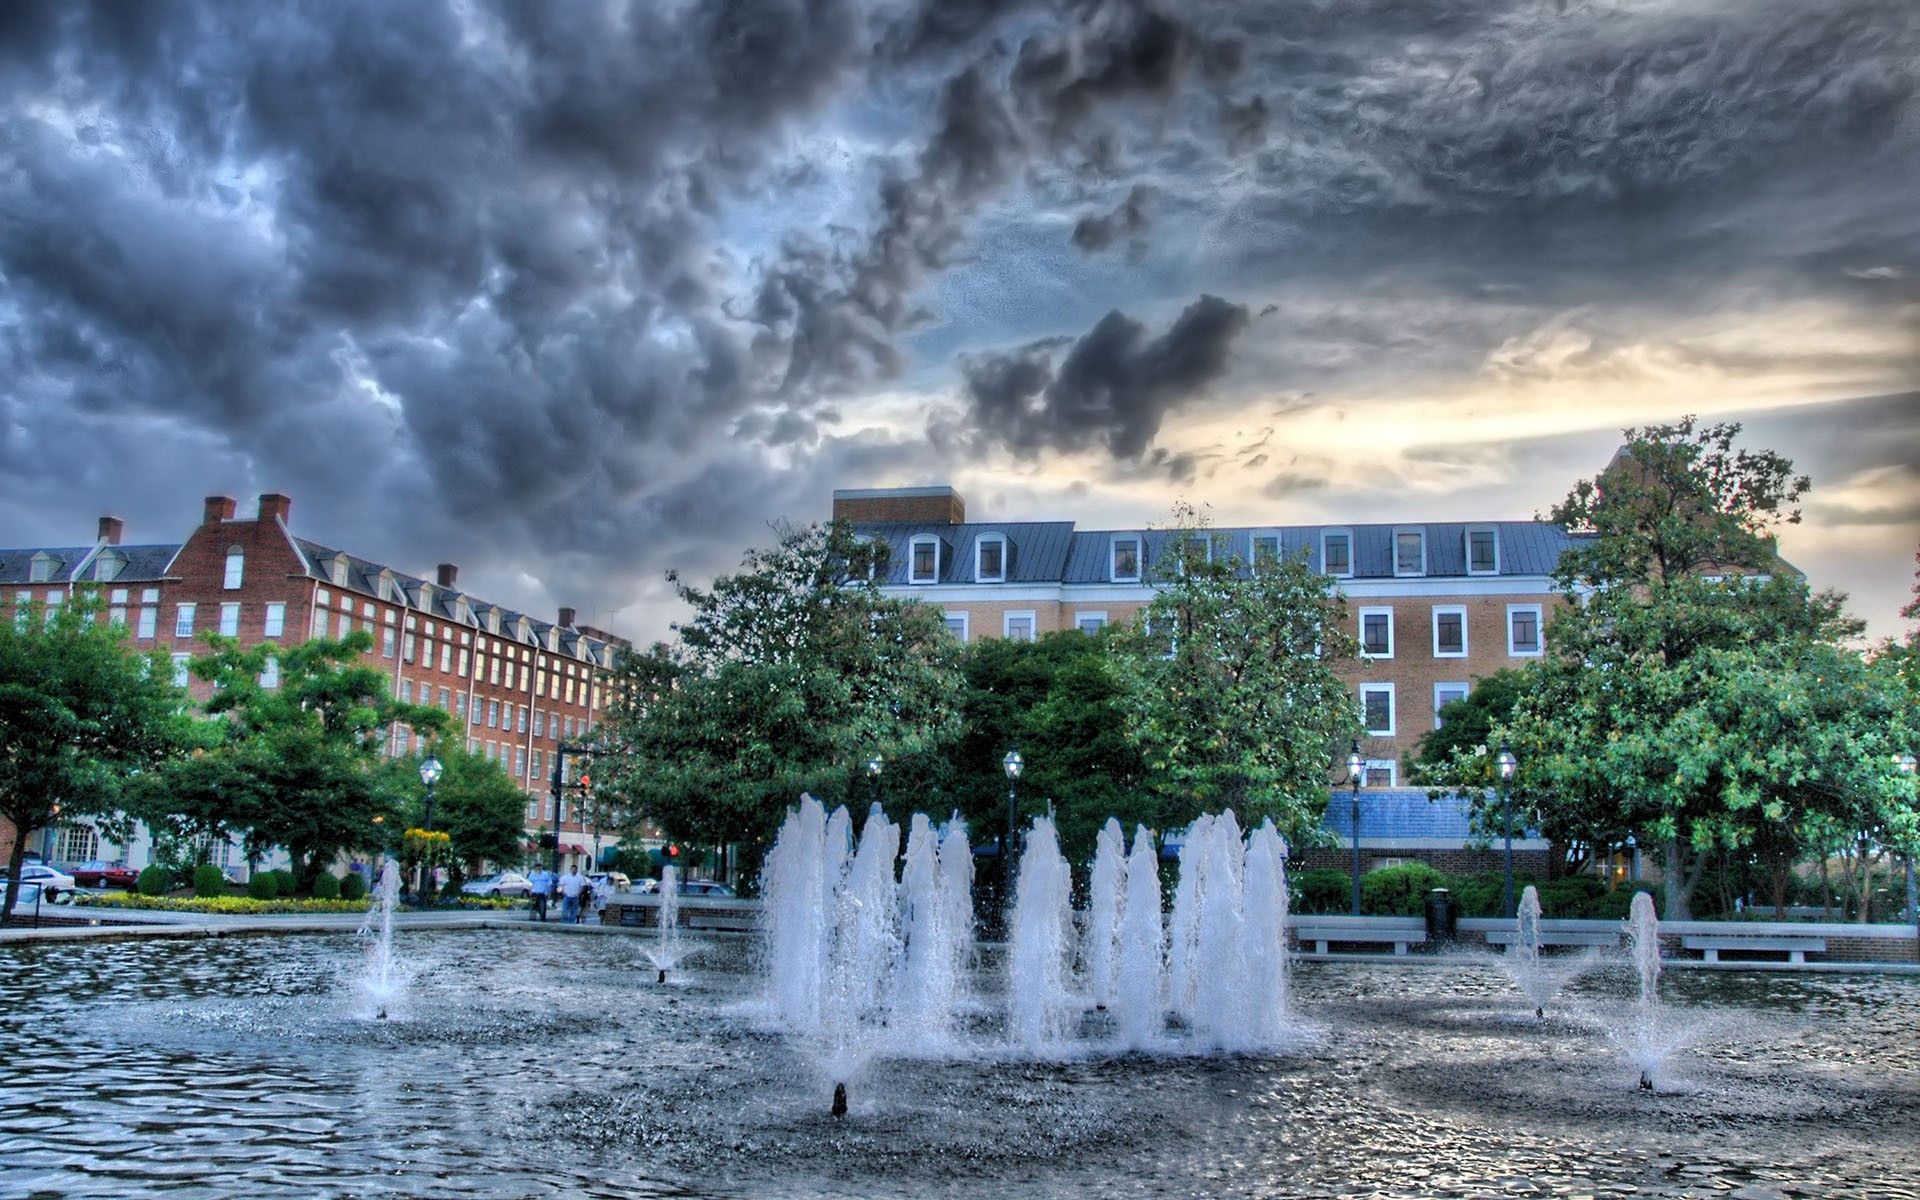 fountain, hdr, cities, water, trees, building